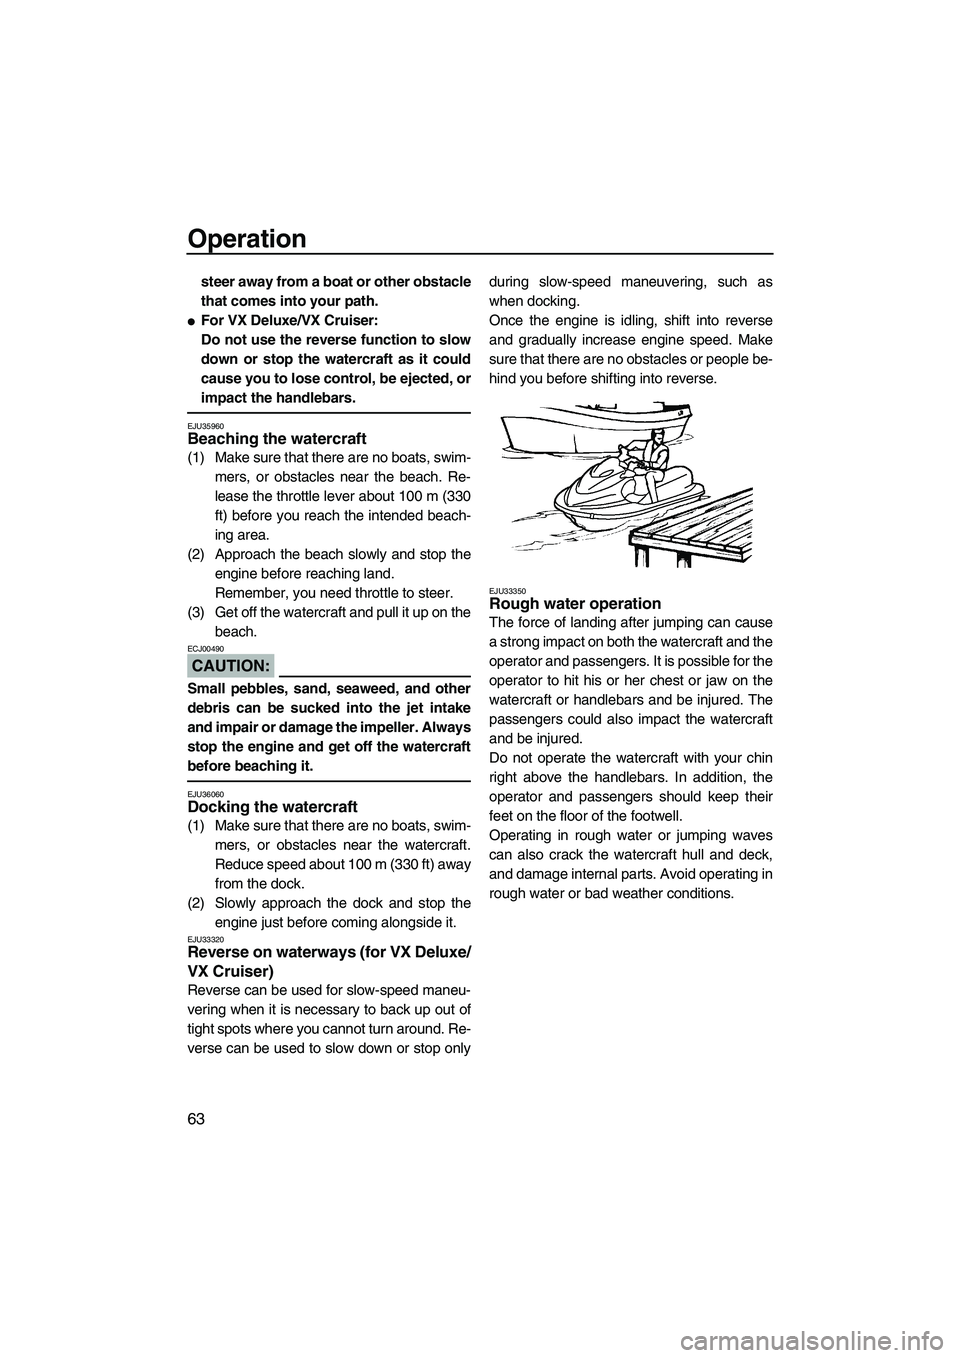 YAMAHA VX CRUISER 2007  Owners Manual Operation
63
steer away from a boat or other obstacle
that comes into your path.
For VX Deluxe/VX Cruiser:
Do not use the reverse function to slow
down or stop the watercraft as it could
cause you to